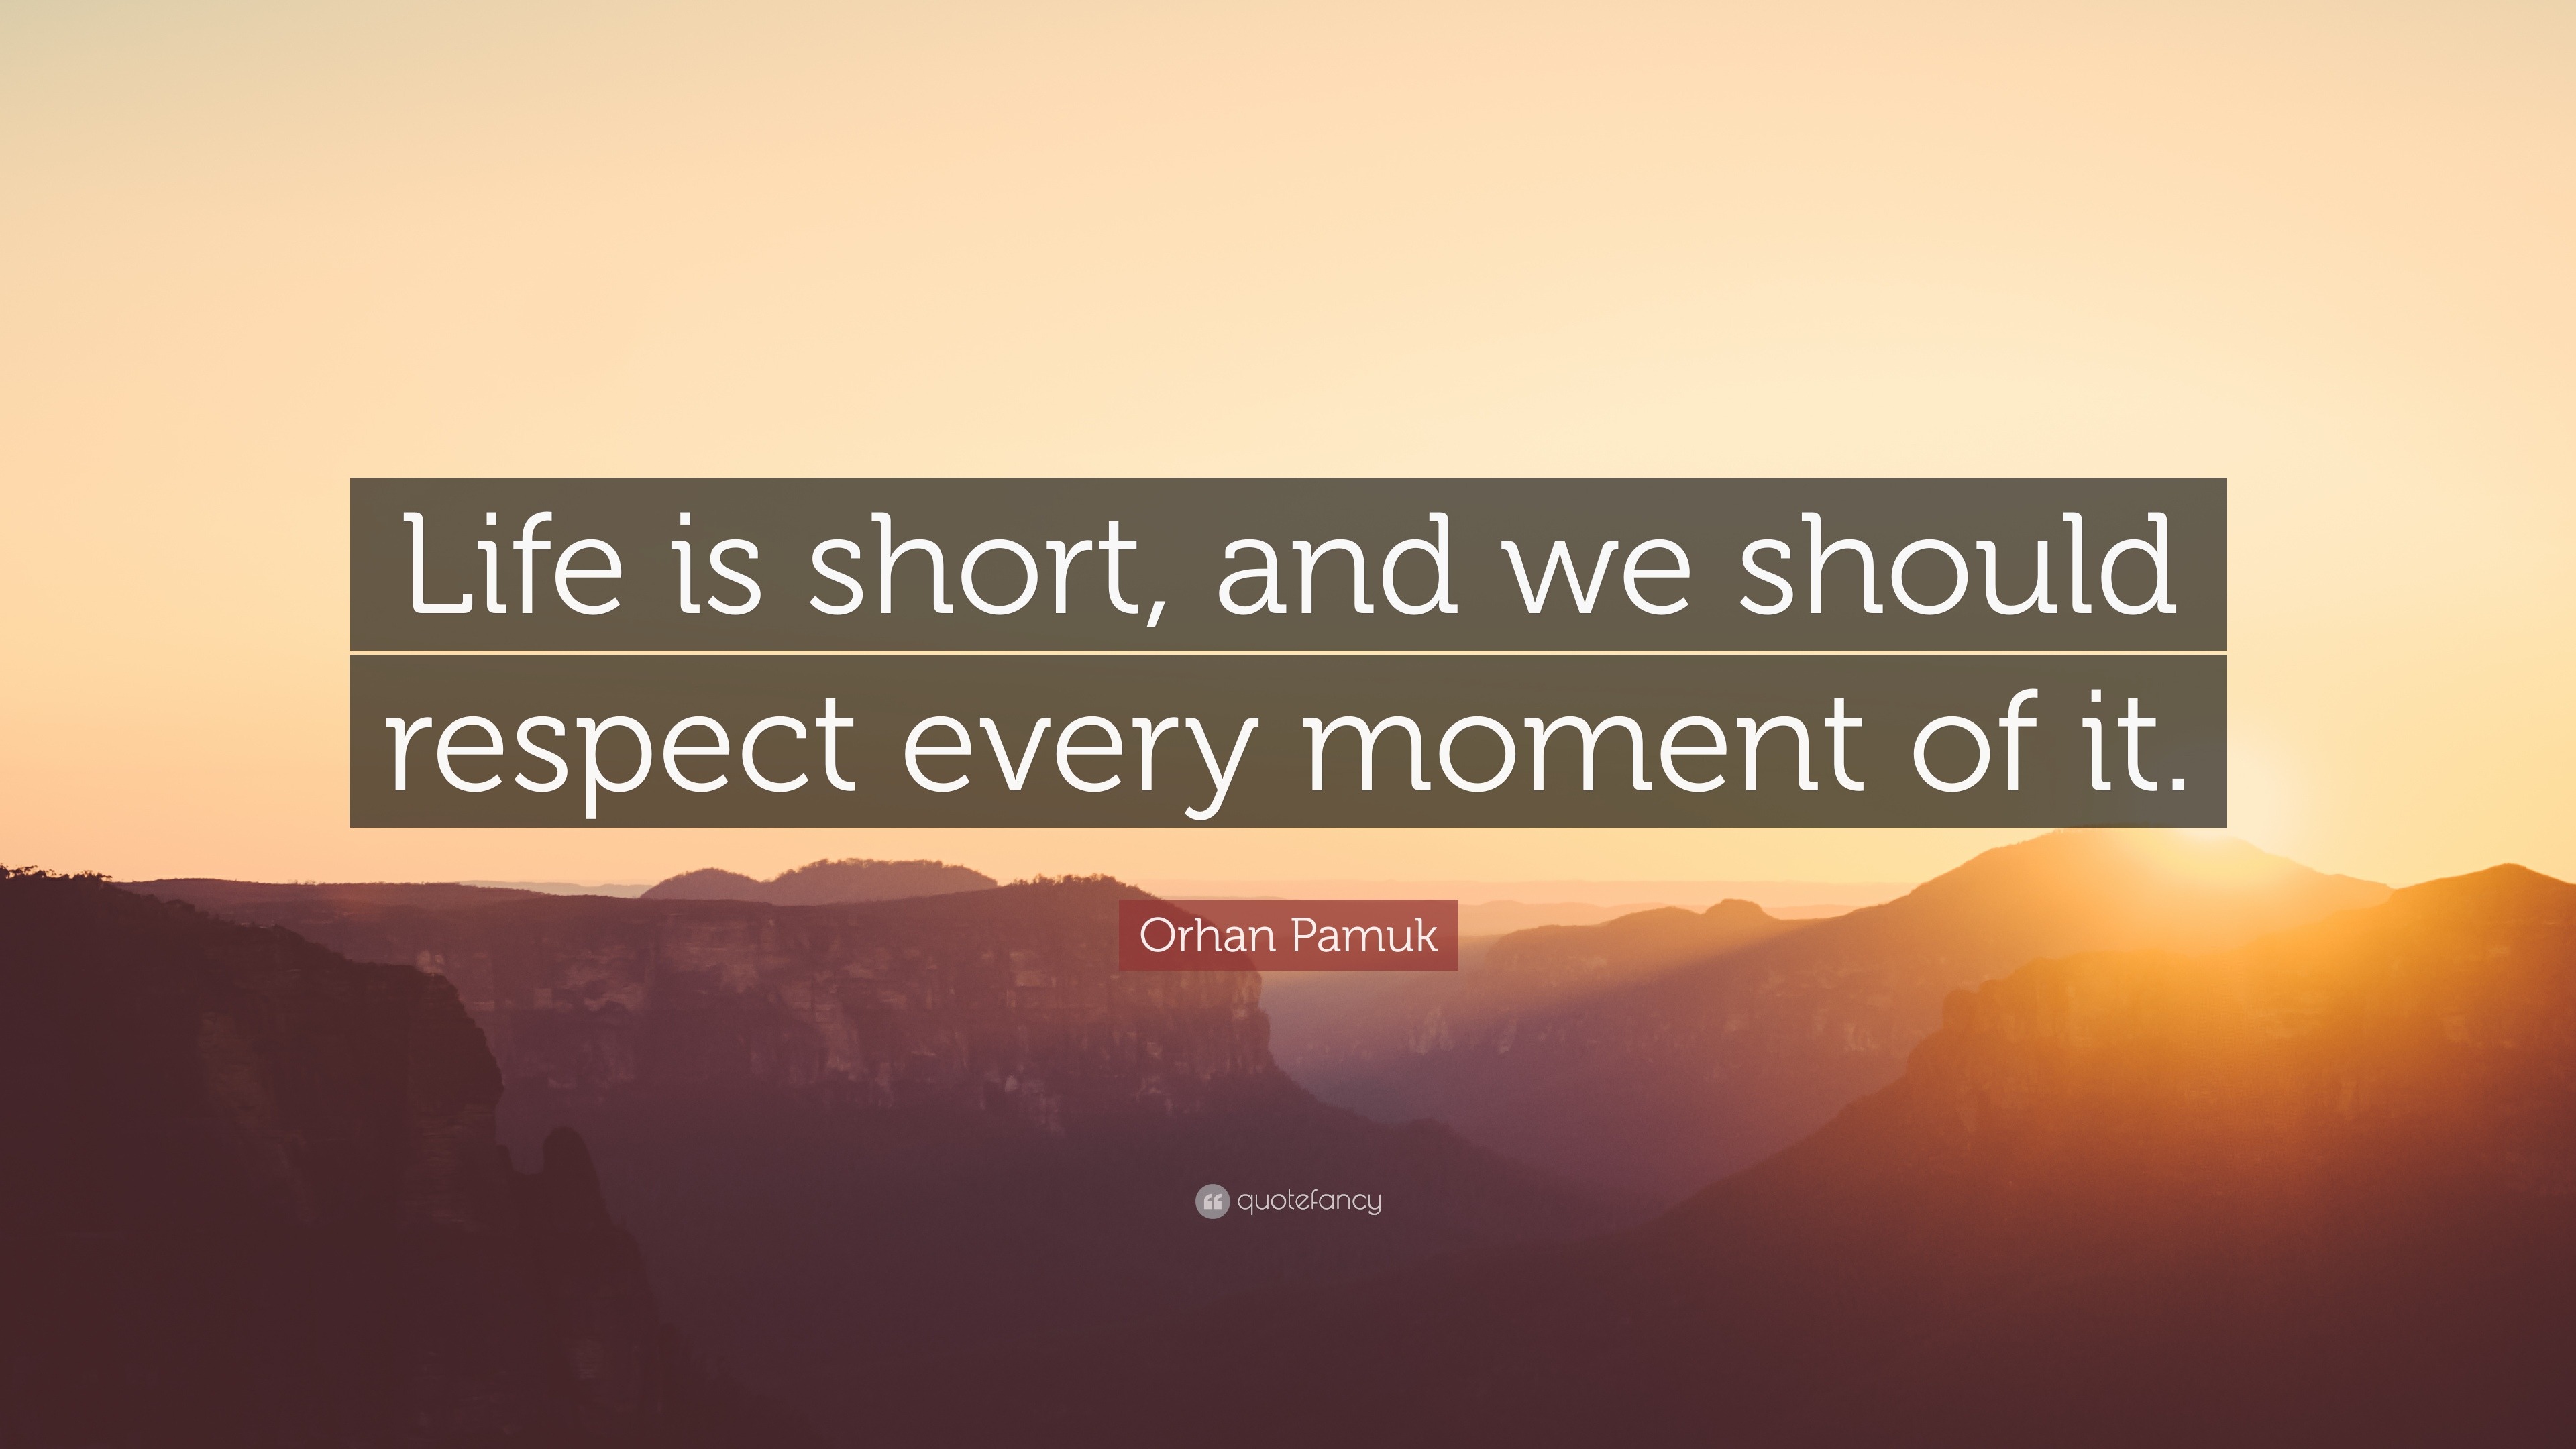 322817 Orhan Pamuk Quote Life Is Short And We Should Respect Every Moment 